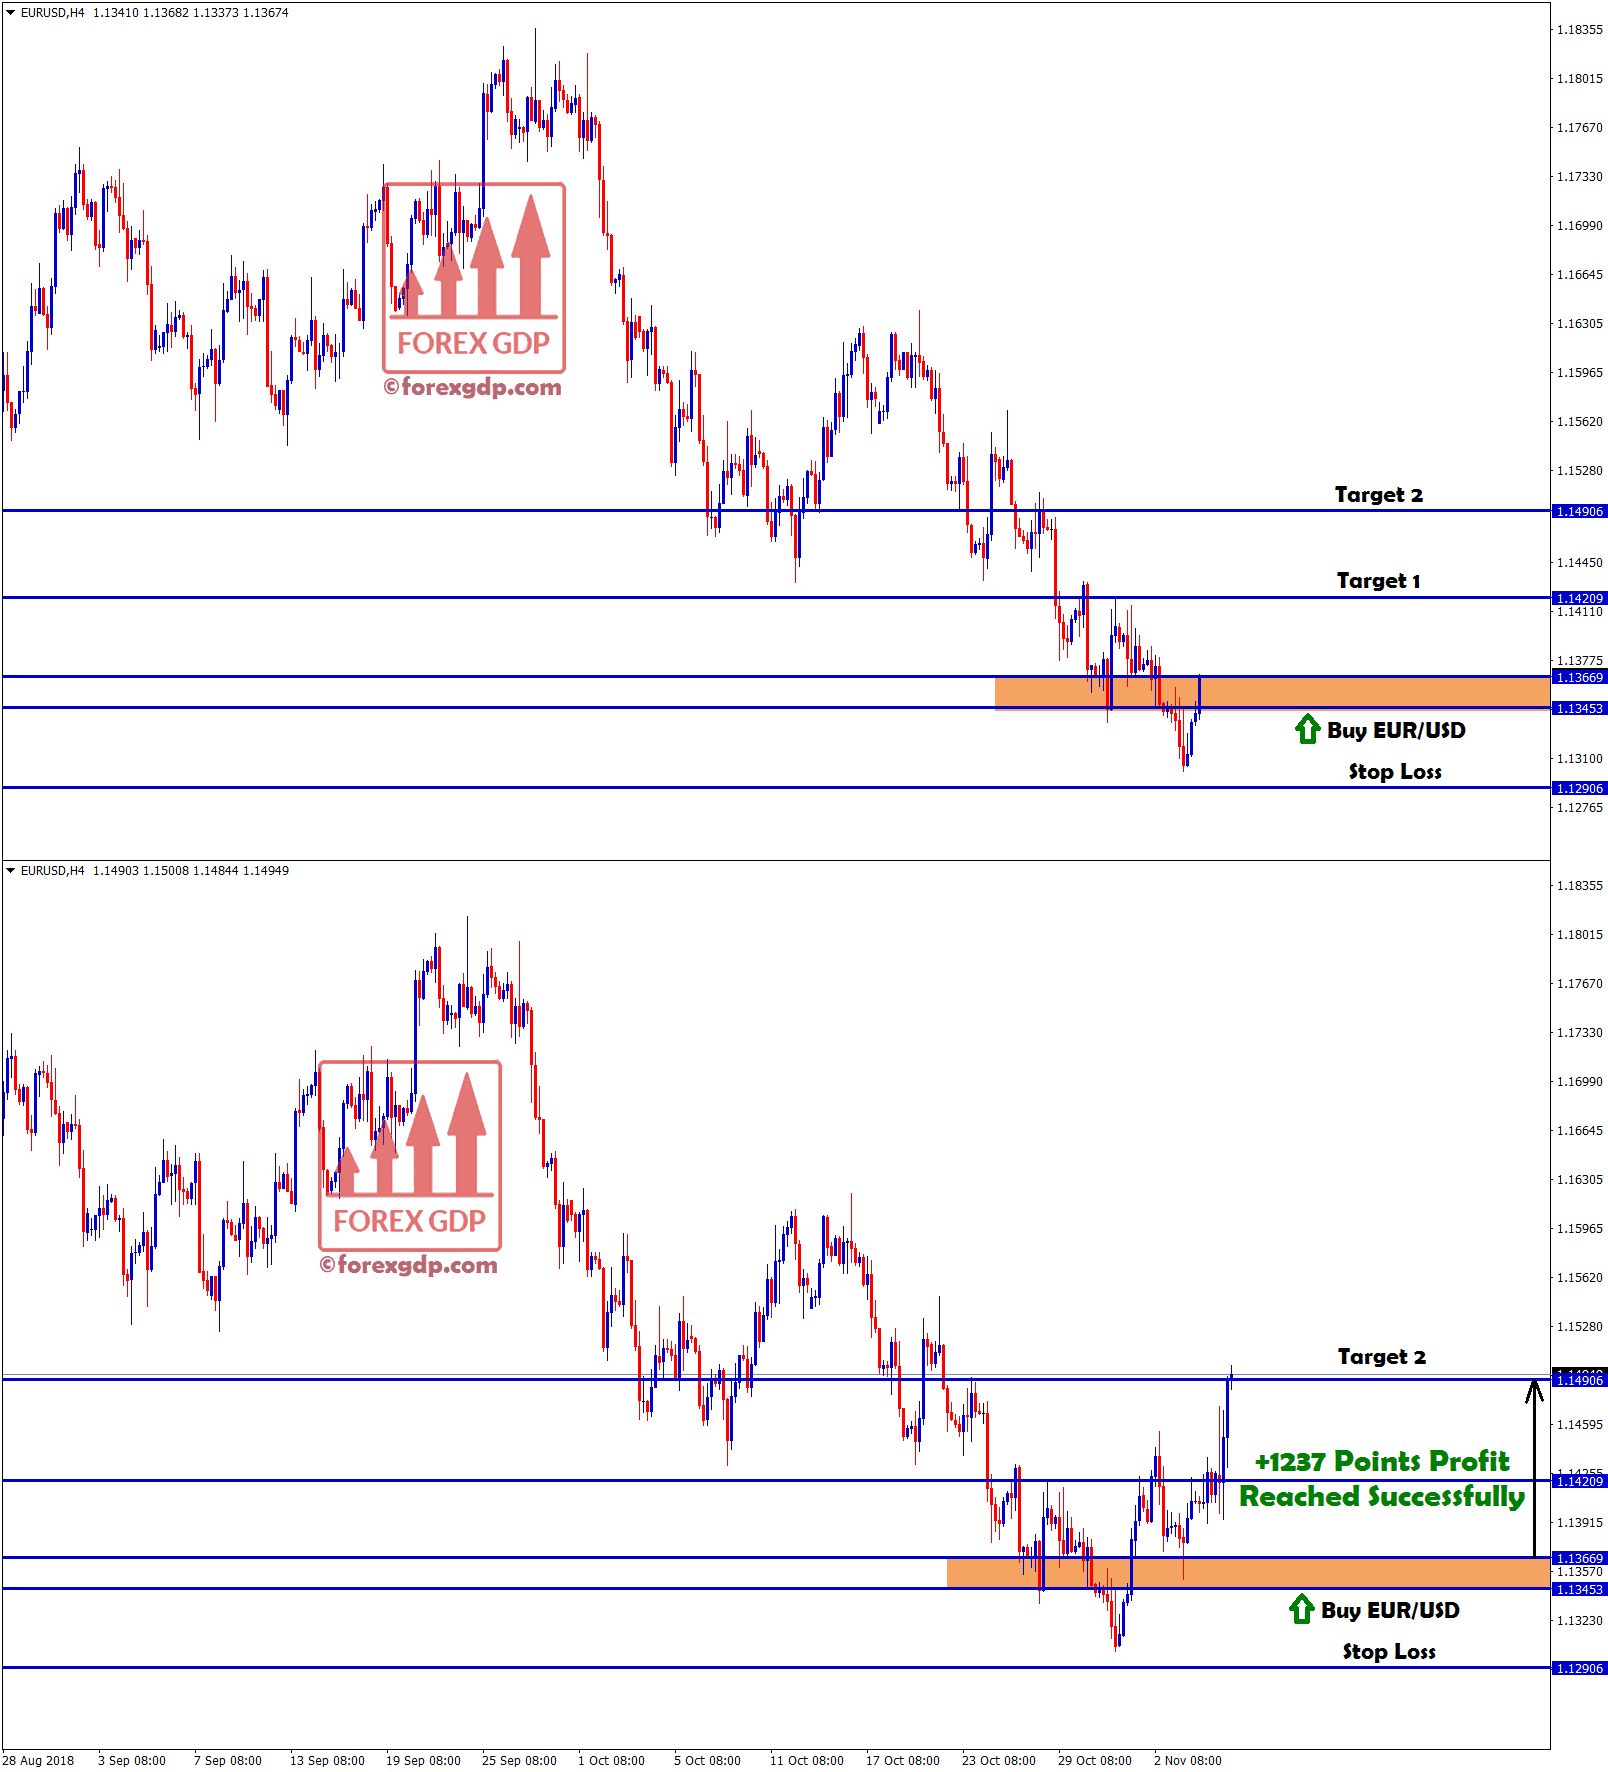 eur usd buy signal made profit with +1237 points